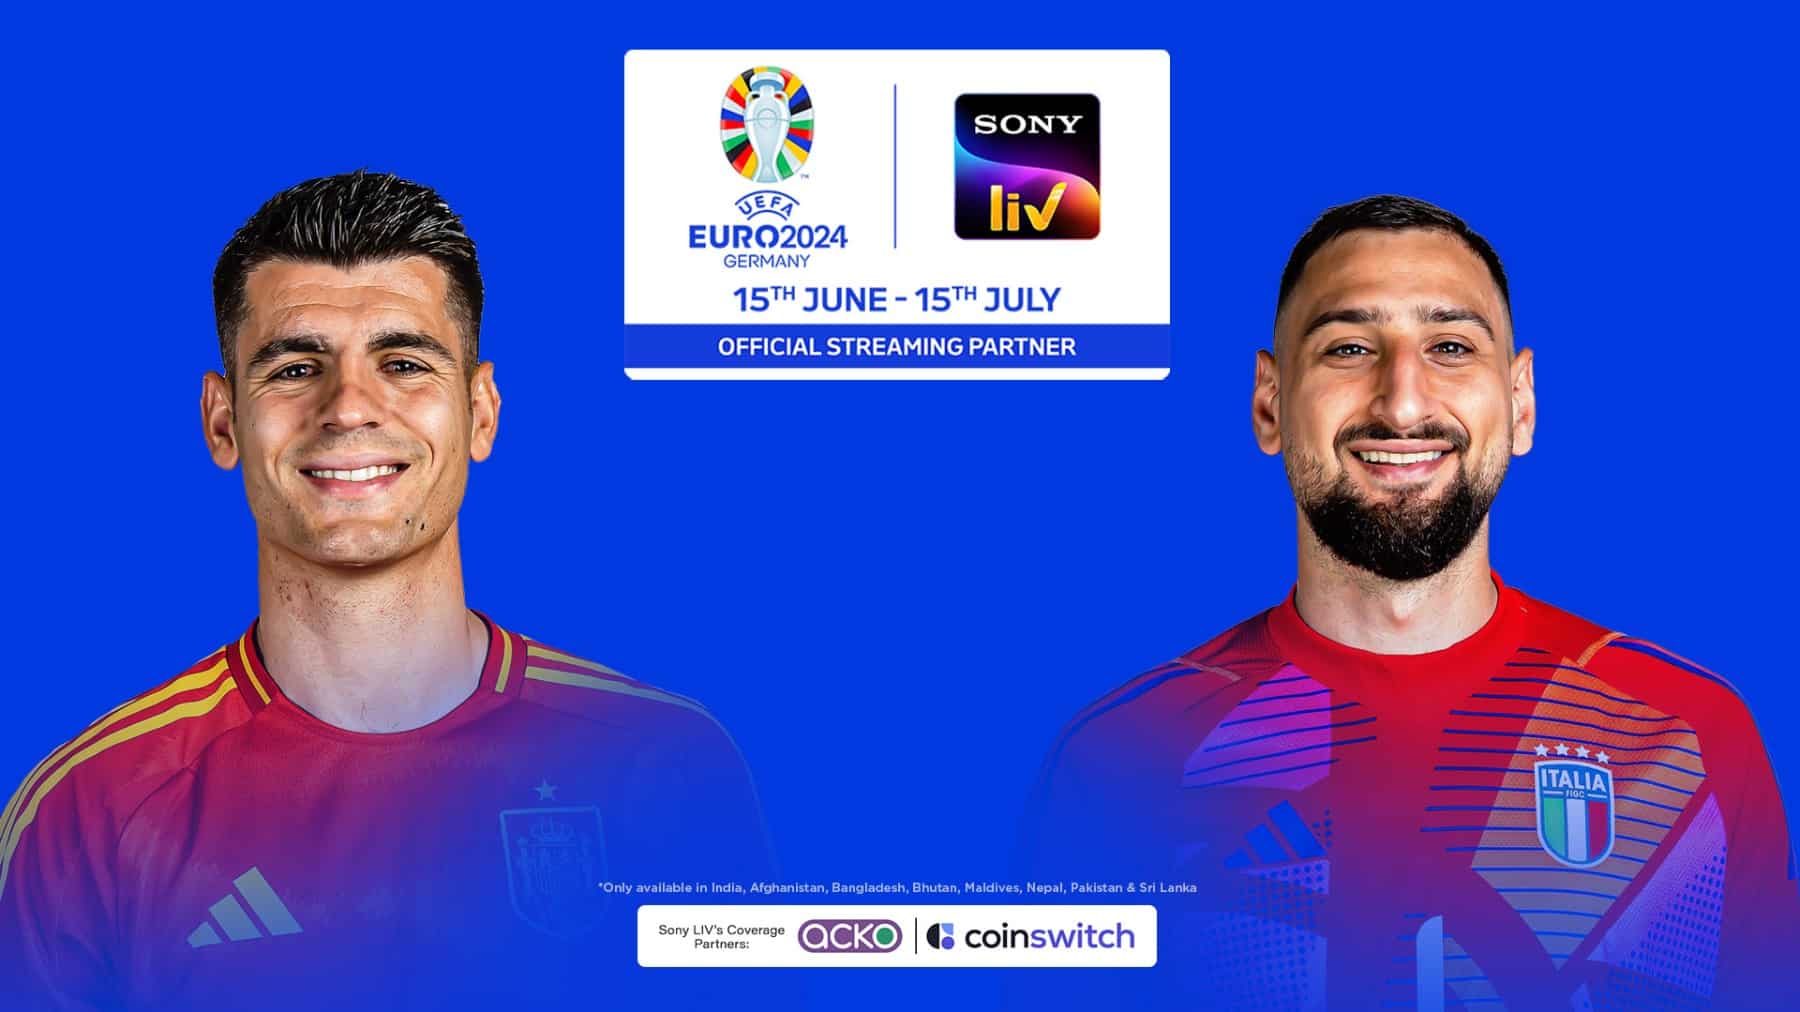 https://www.mobilemasala.com/sports/UEFA-European-Championship-2024-Spains-wingmen-Yamal-and-Nico-Williams-destroy-Italy-as-the-red-army-enters-the-knockout-round-i274312